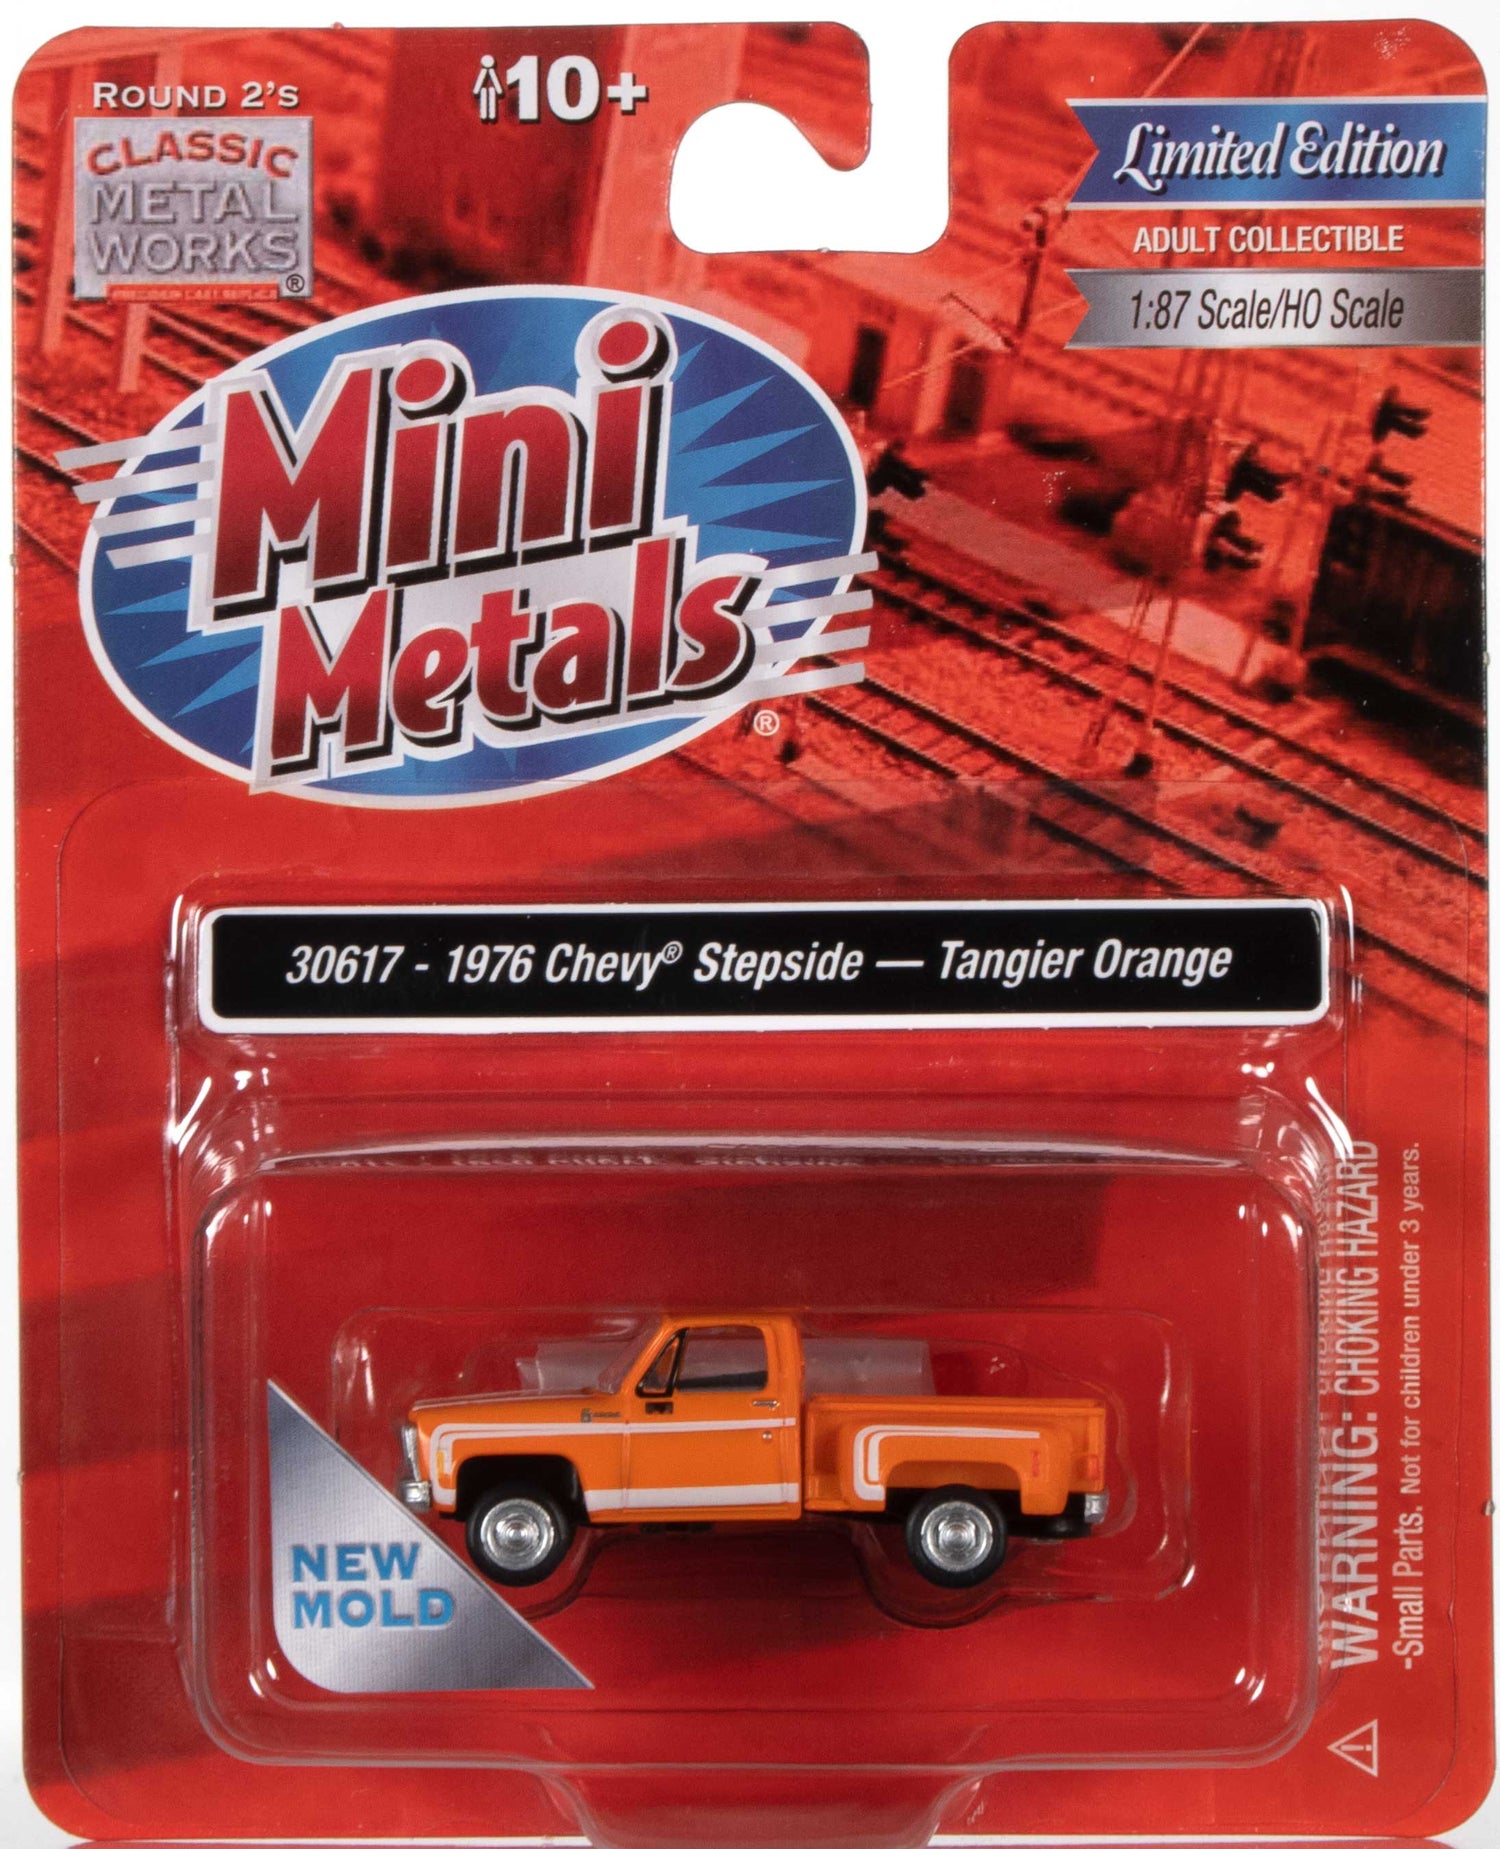 Classic Metal Works 1976 Chevy Stepside Pickup (Tangier Orange) 1:87 HO Scale